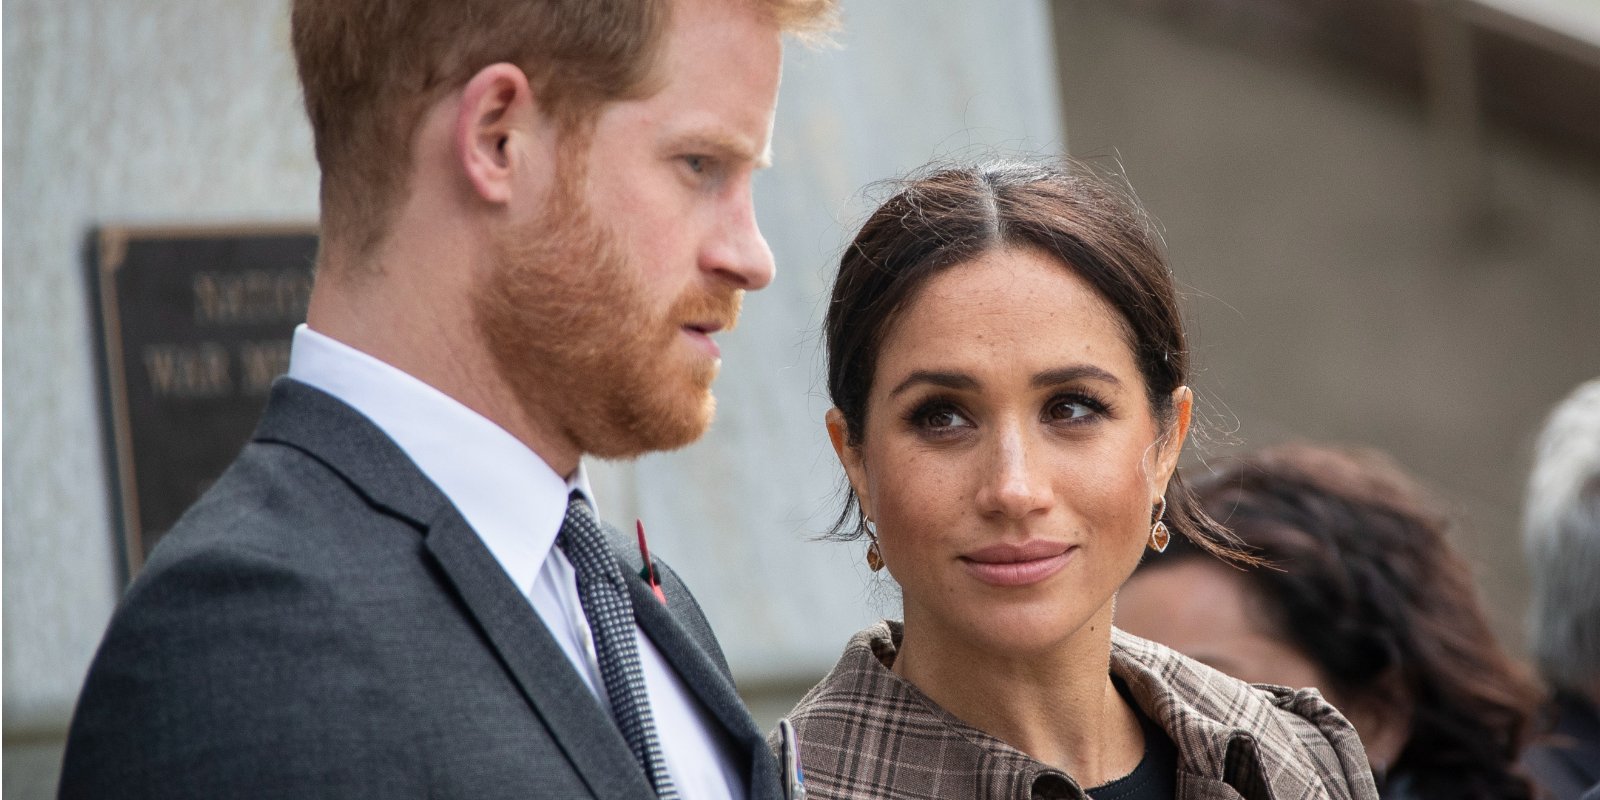 Prince Harry and Meghan Markle on their official 16-day Autumn tour visiting cities in Australia, Fiji, Tonga and New Zealand.